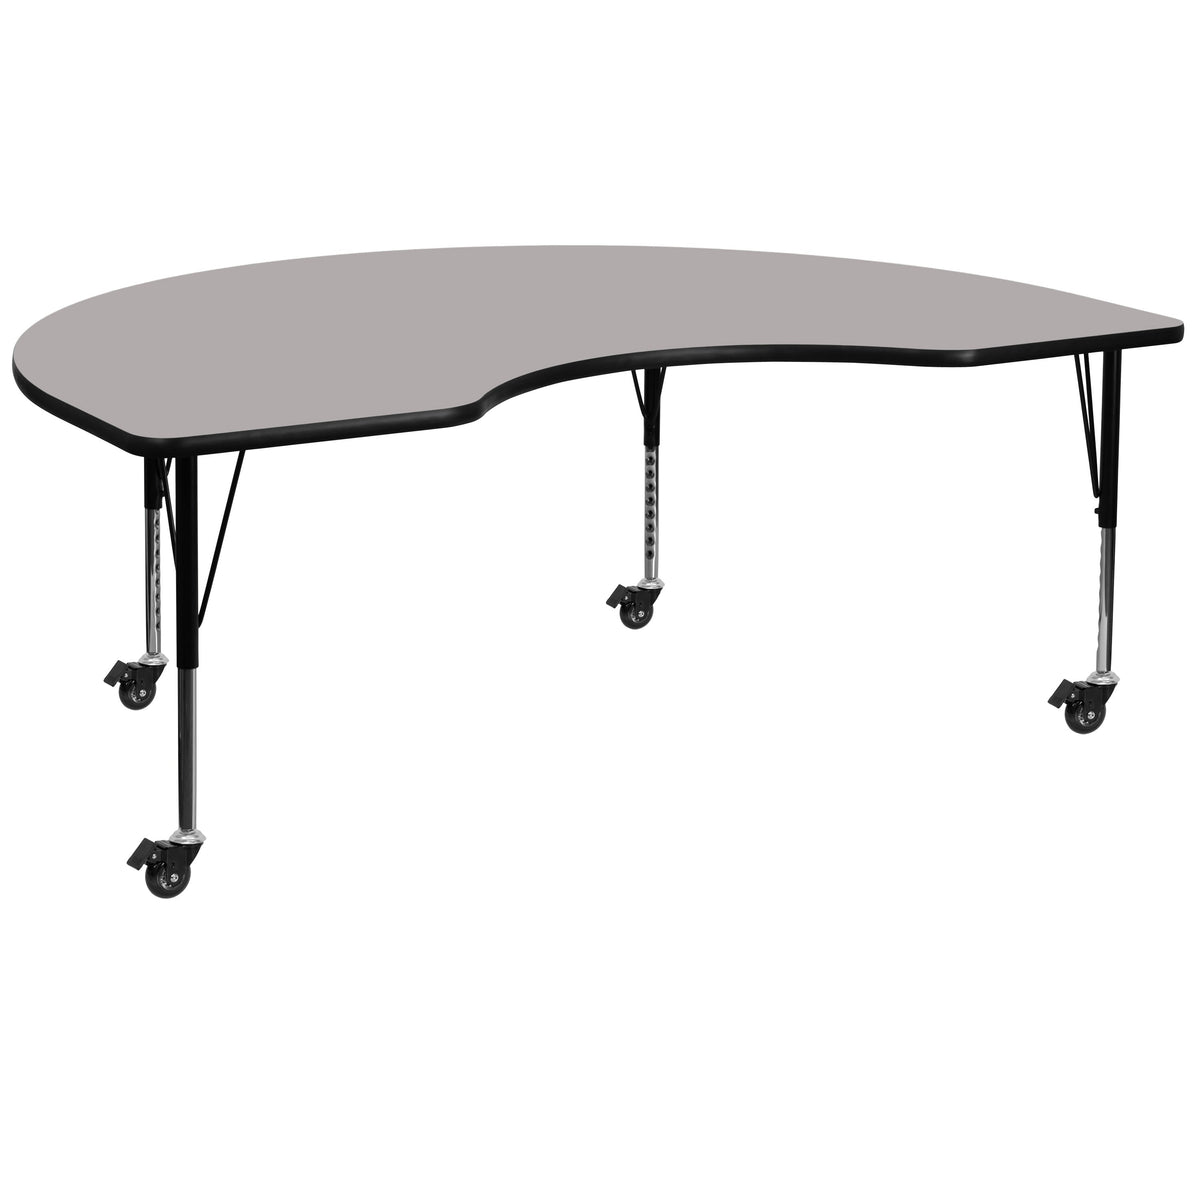 Gray |#| Mobile 48inchW x 96inchL Kidney Grey HP Laminate Adjustable Activity Table